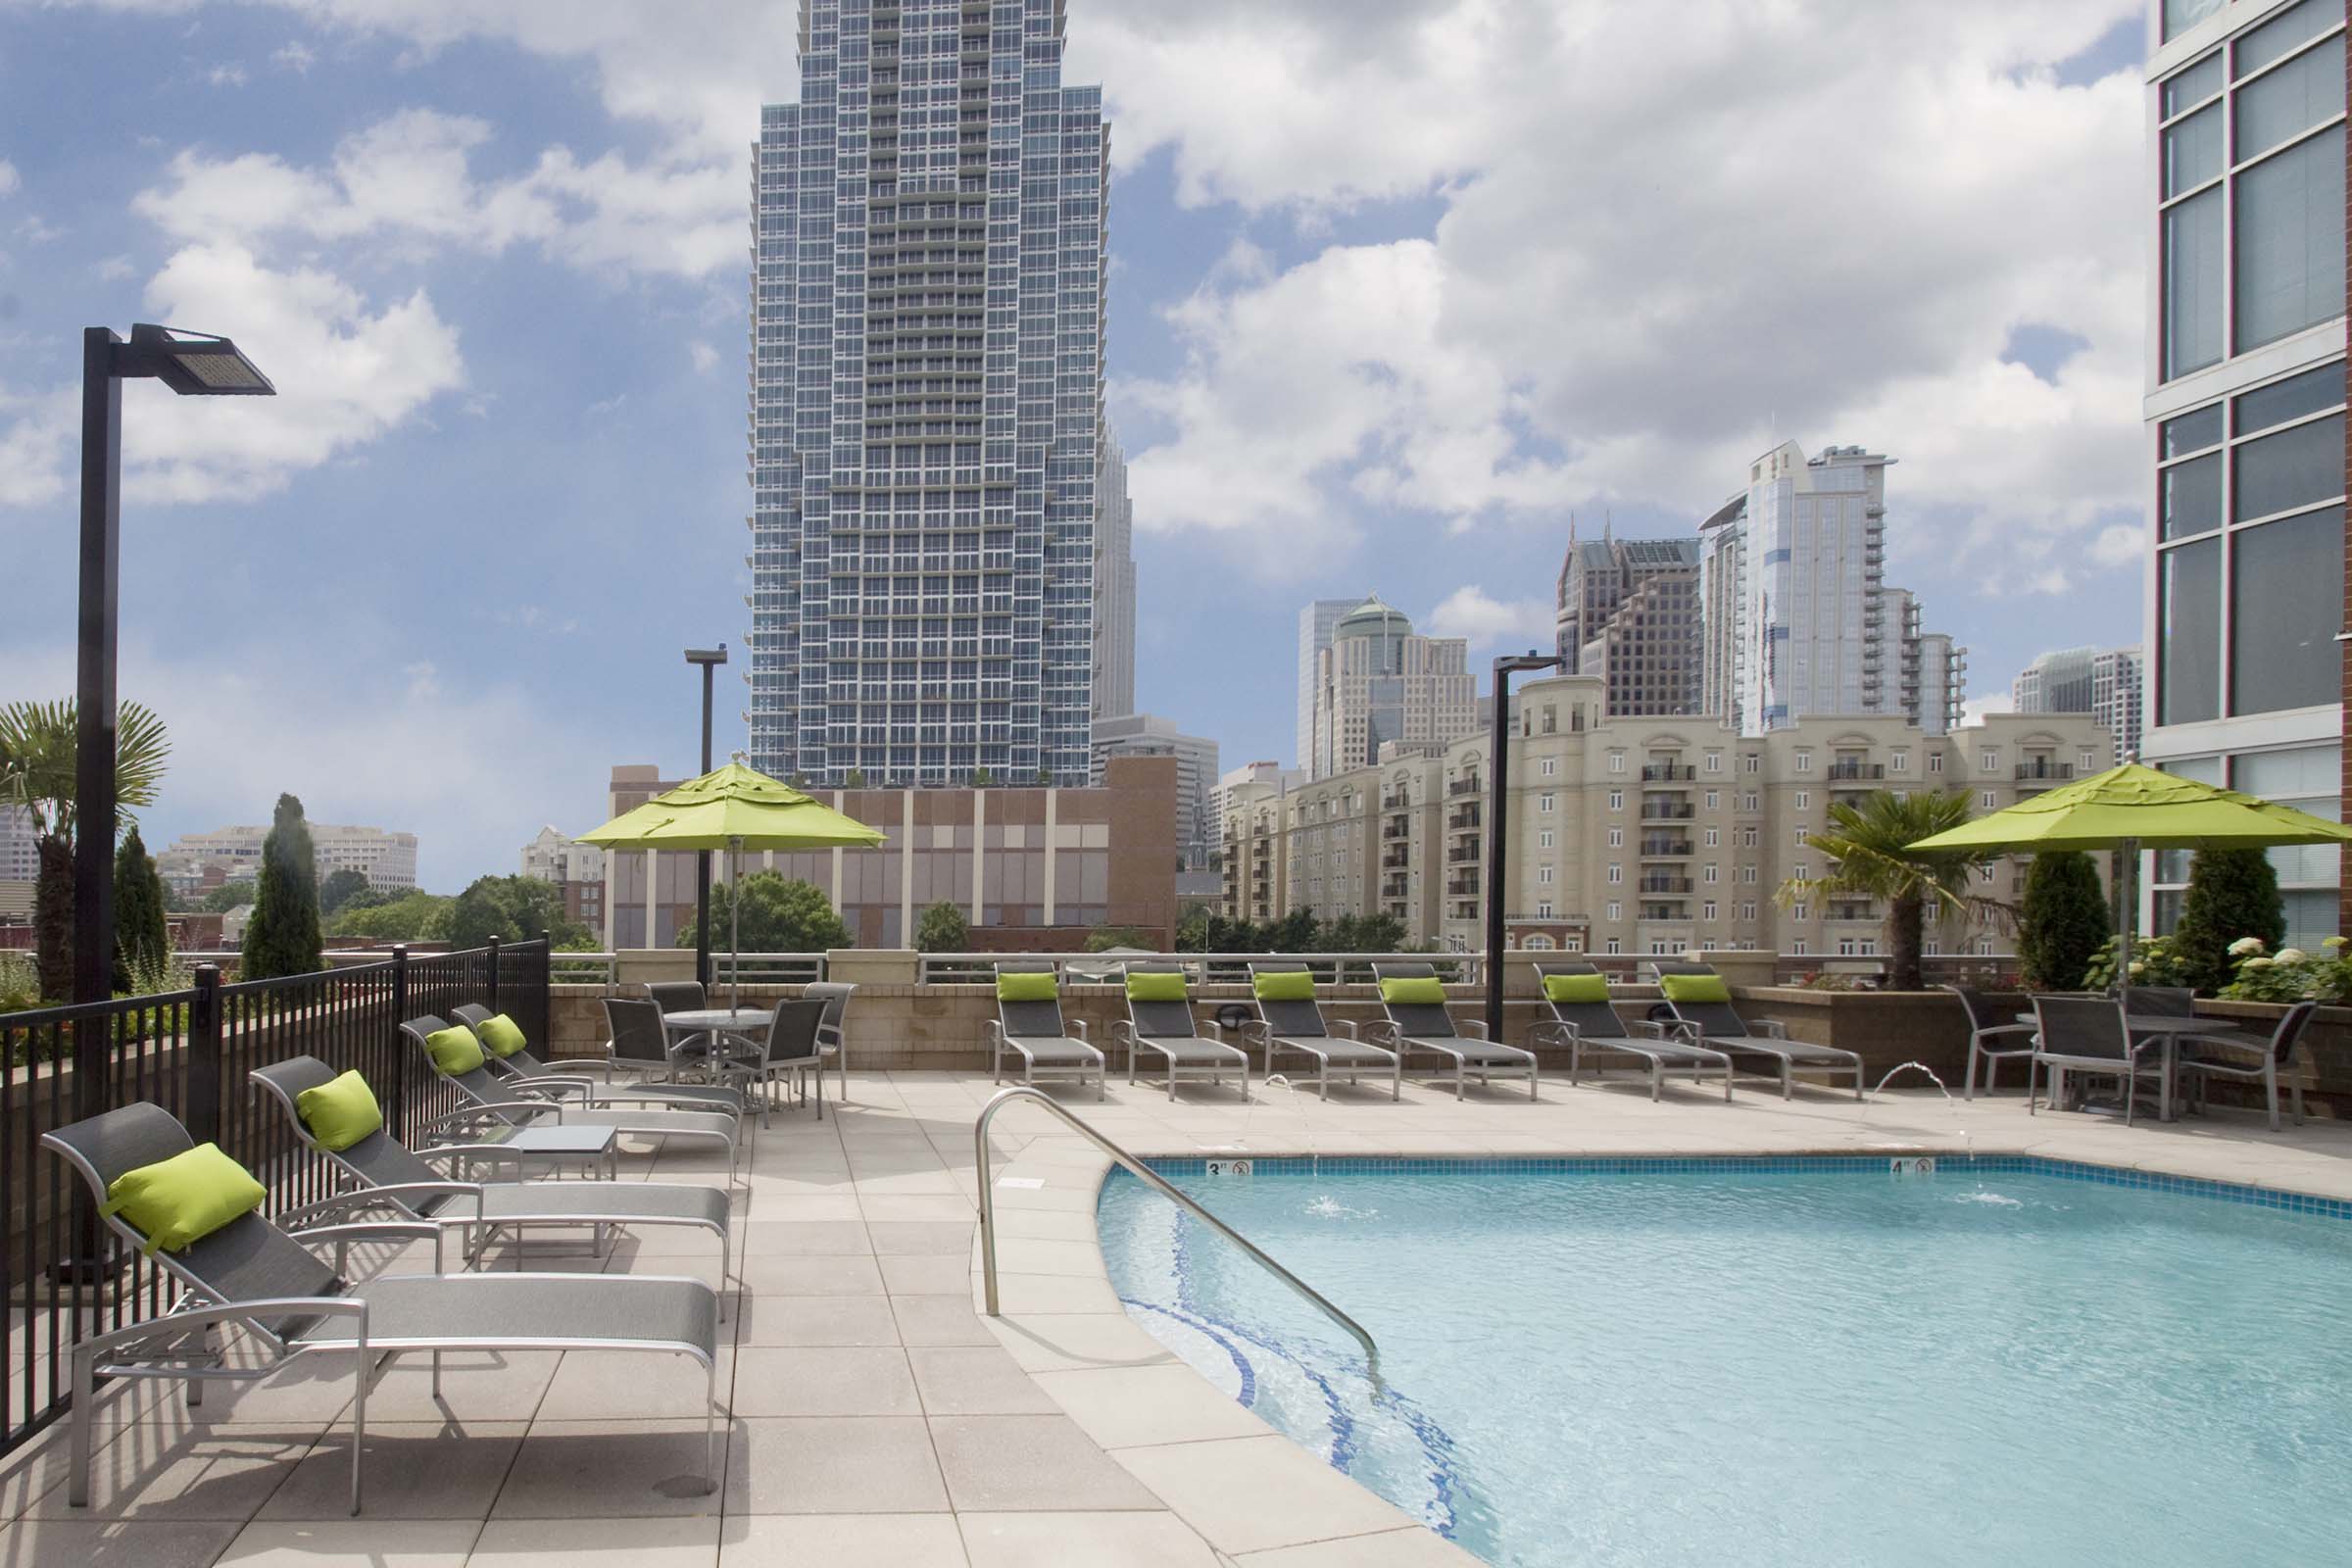 Rooftop pool with sundeck overlooking uptown charlotte